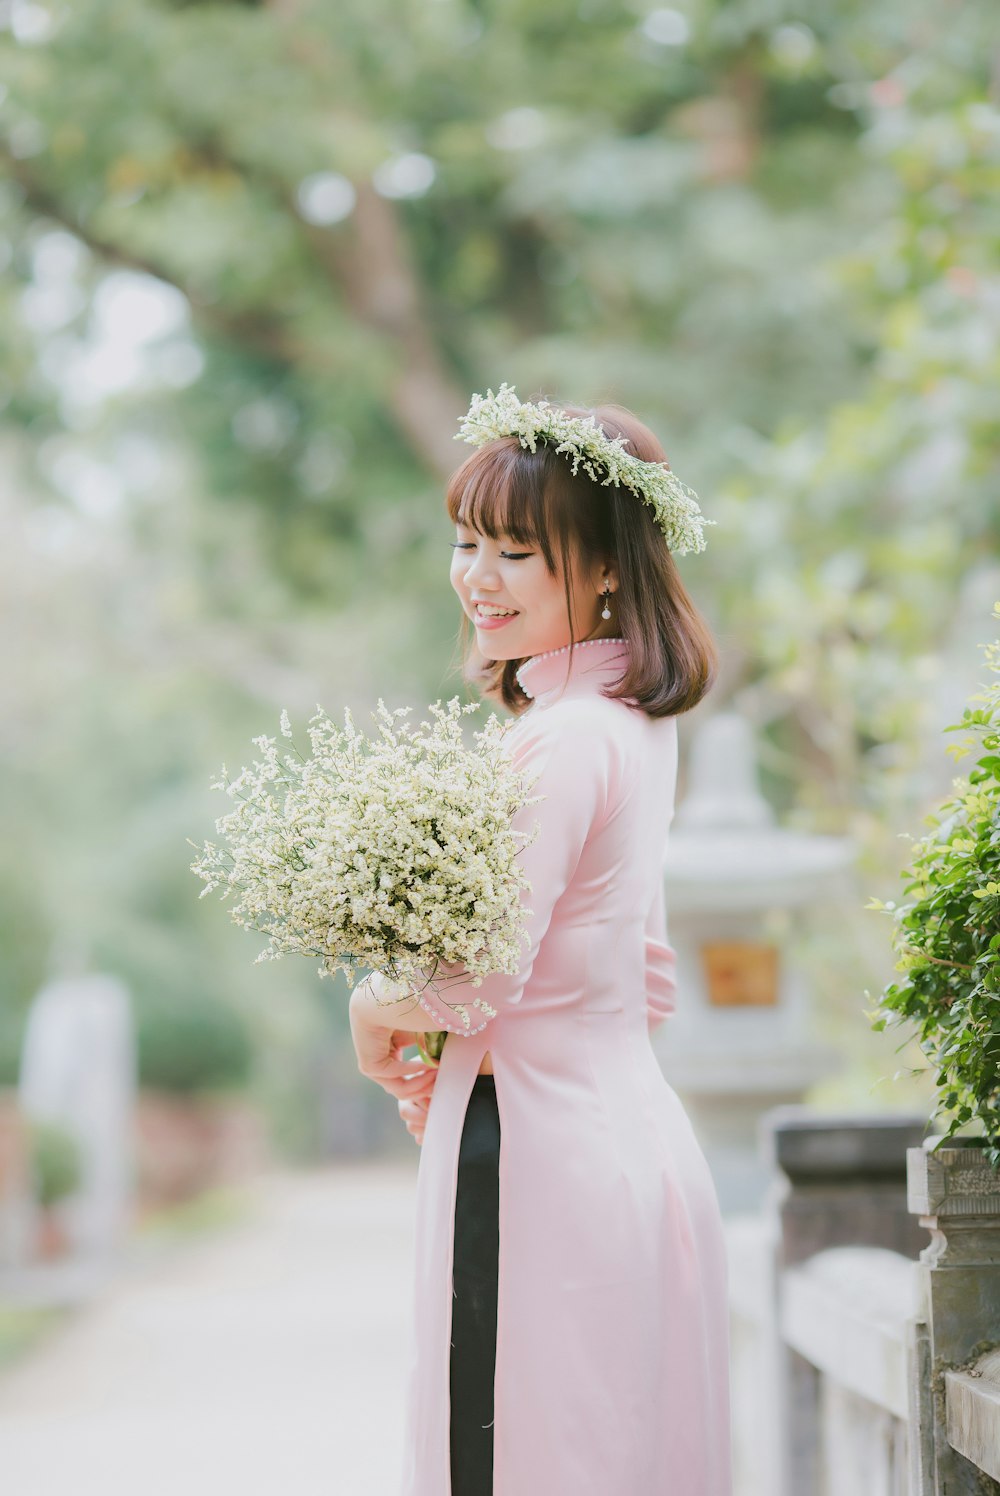 woman smiling while carrying bouquet of flowers